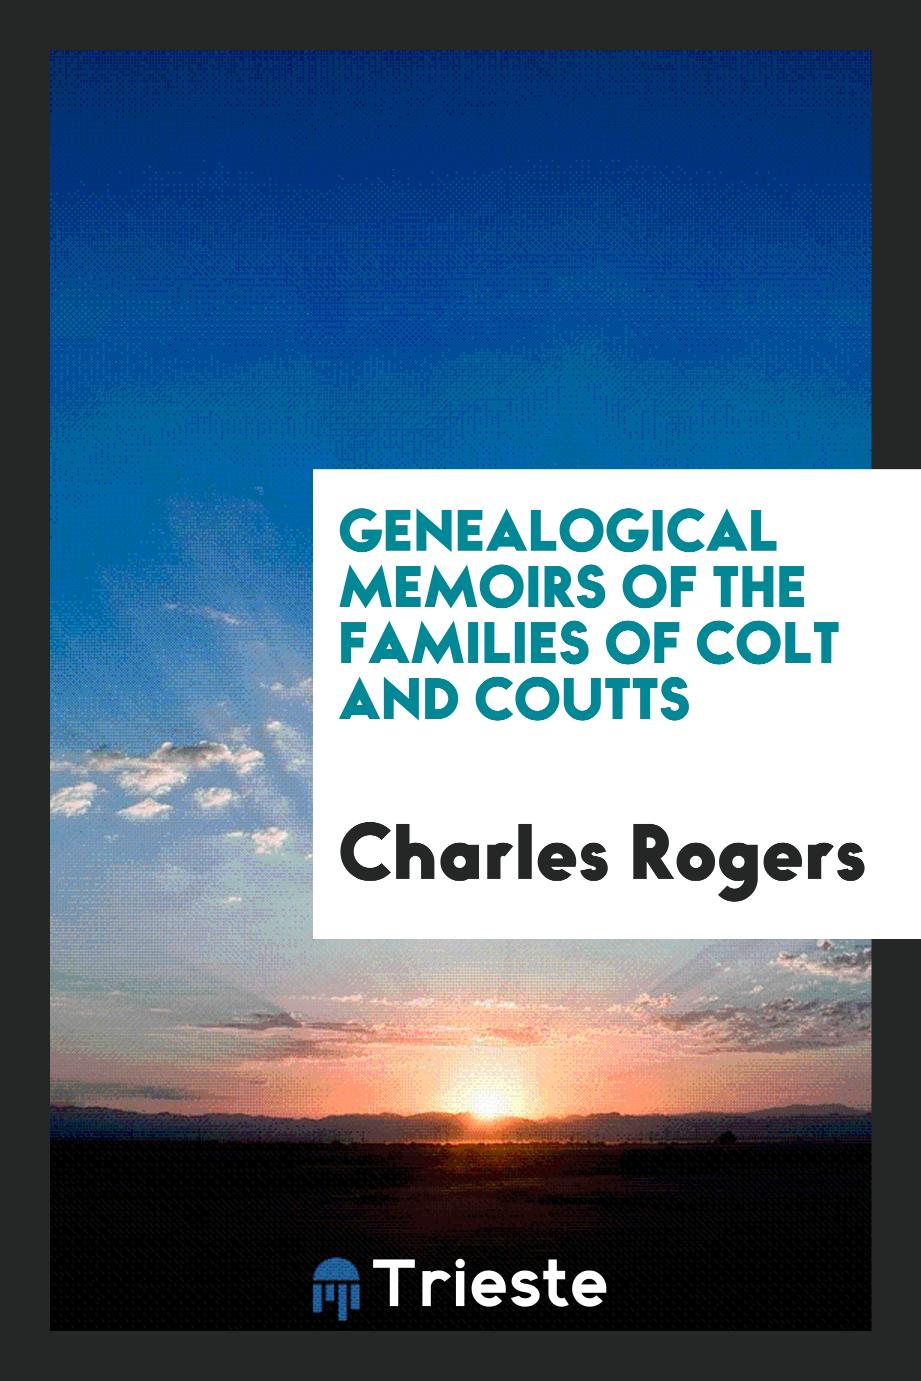 Genealogical memoirs of the families of Colt and Coutts